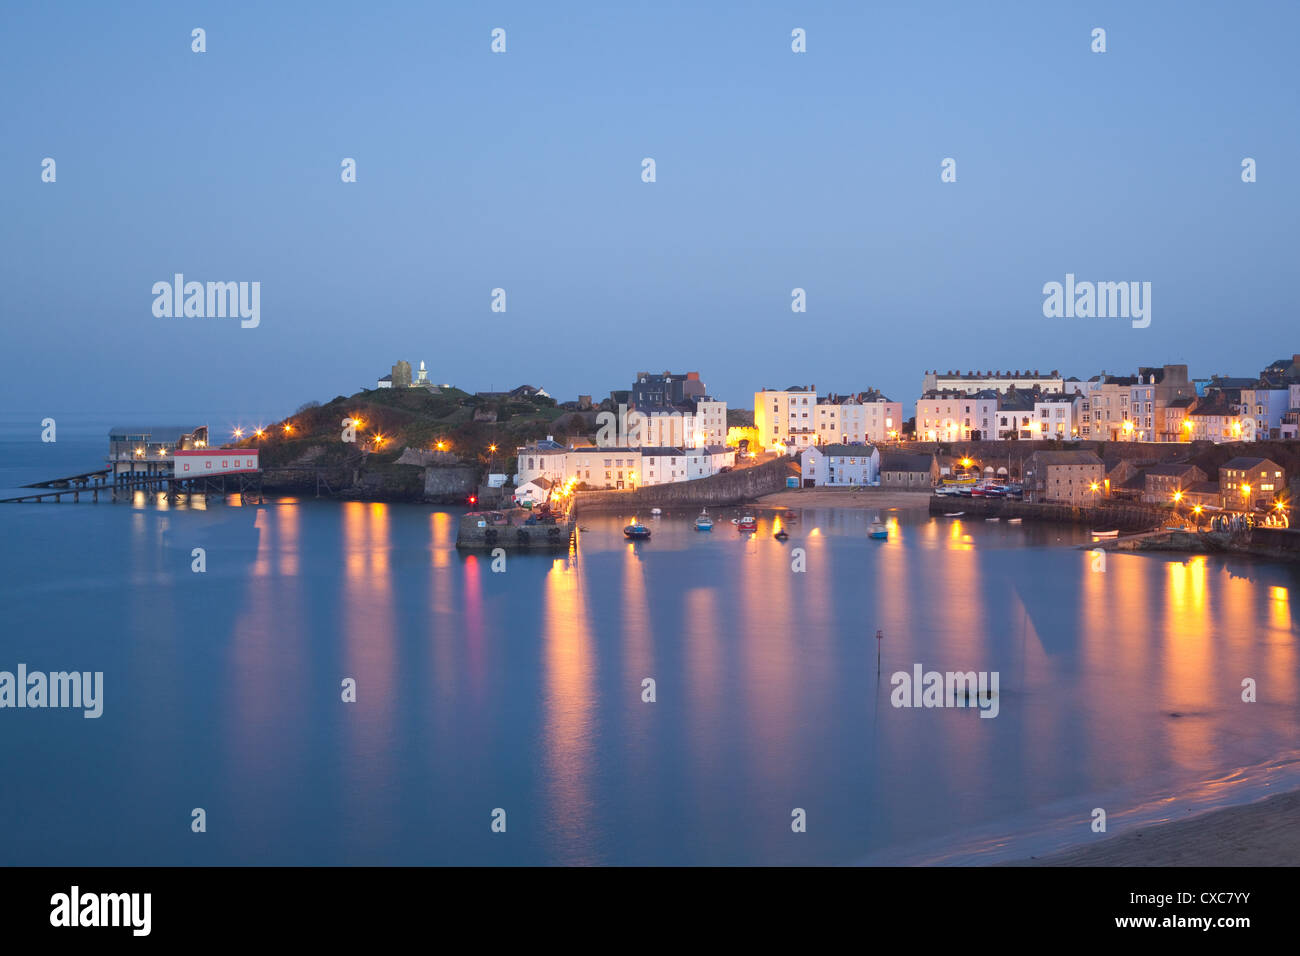 Tenby Harbour, Tenby, Pembrokeshire, Wales, United Kingdom, Europe Stock Photo